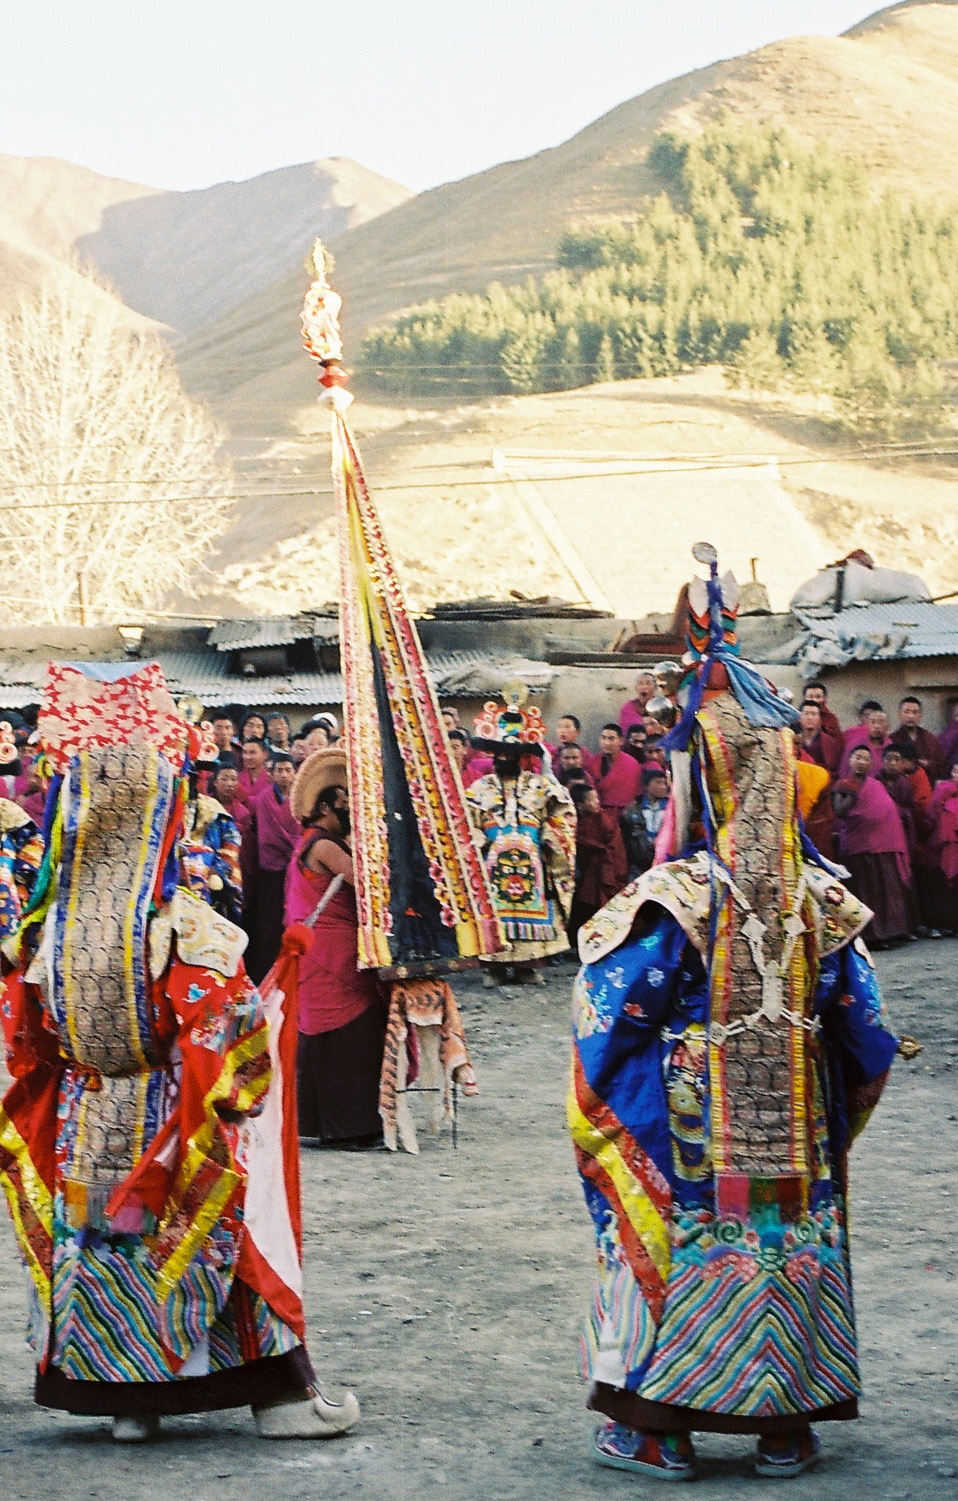 Lamas and performers in sumptuous costumes gather around tall triangular implement topped by stylized skull